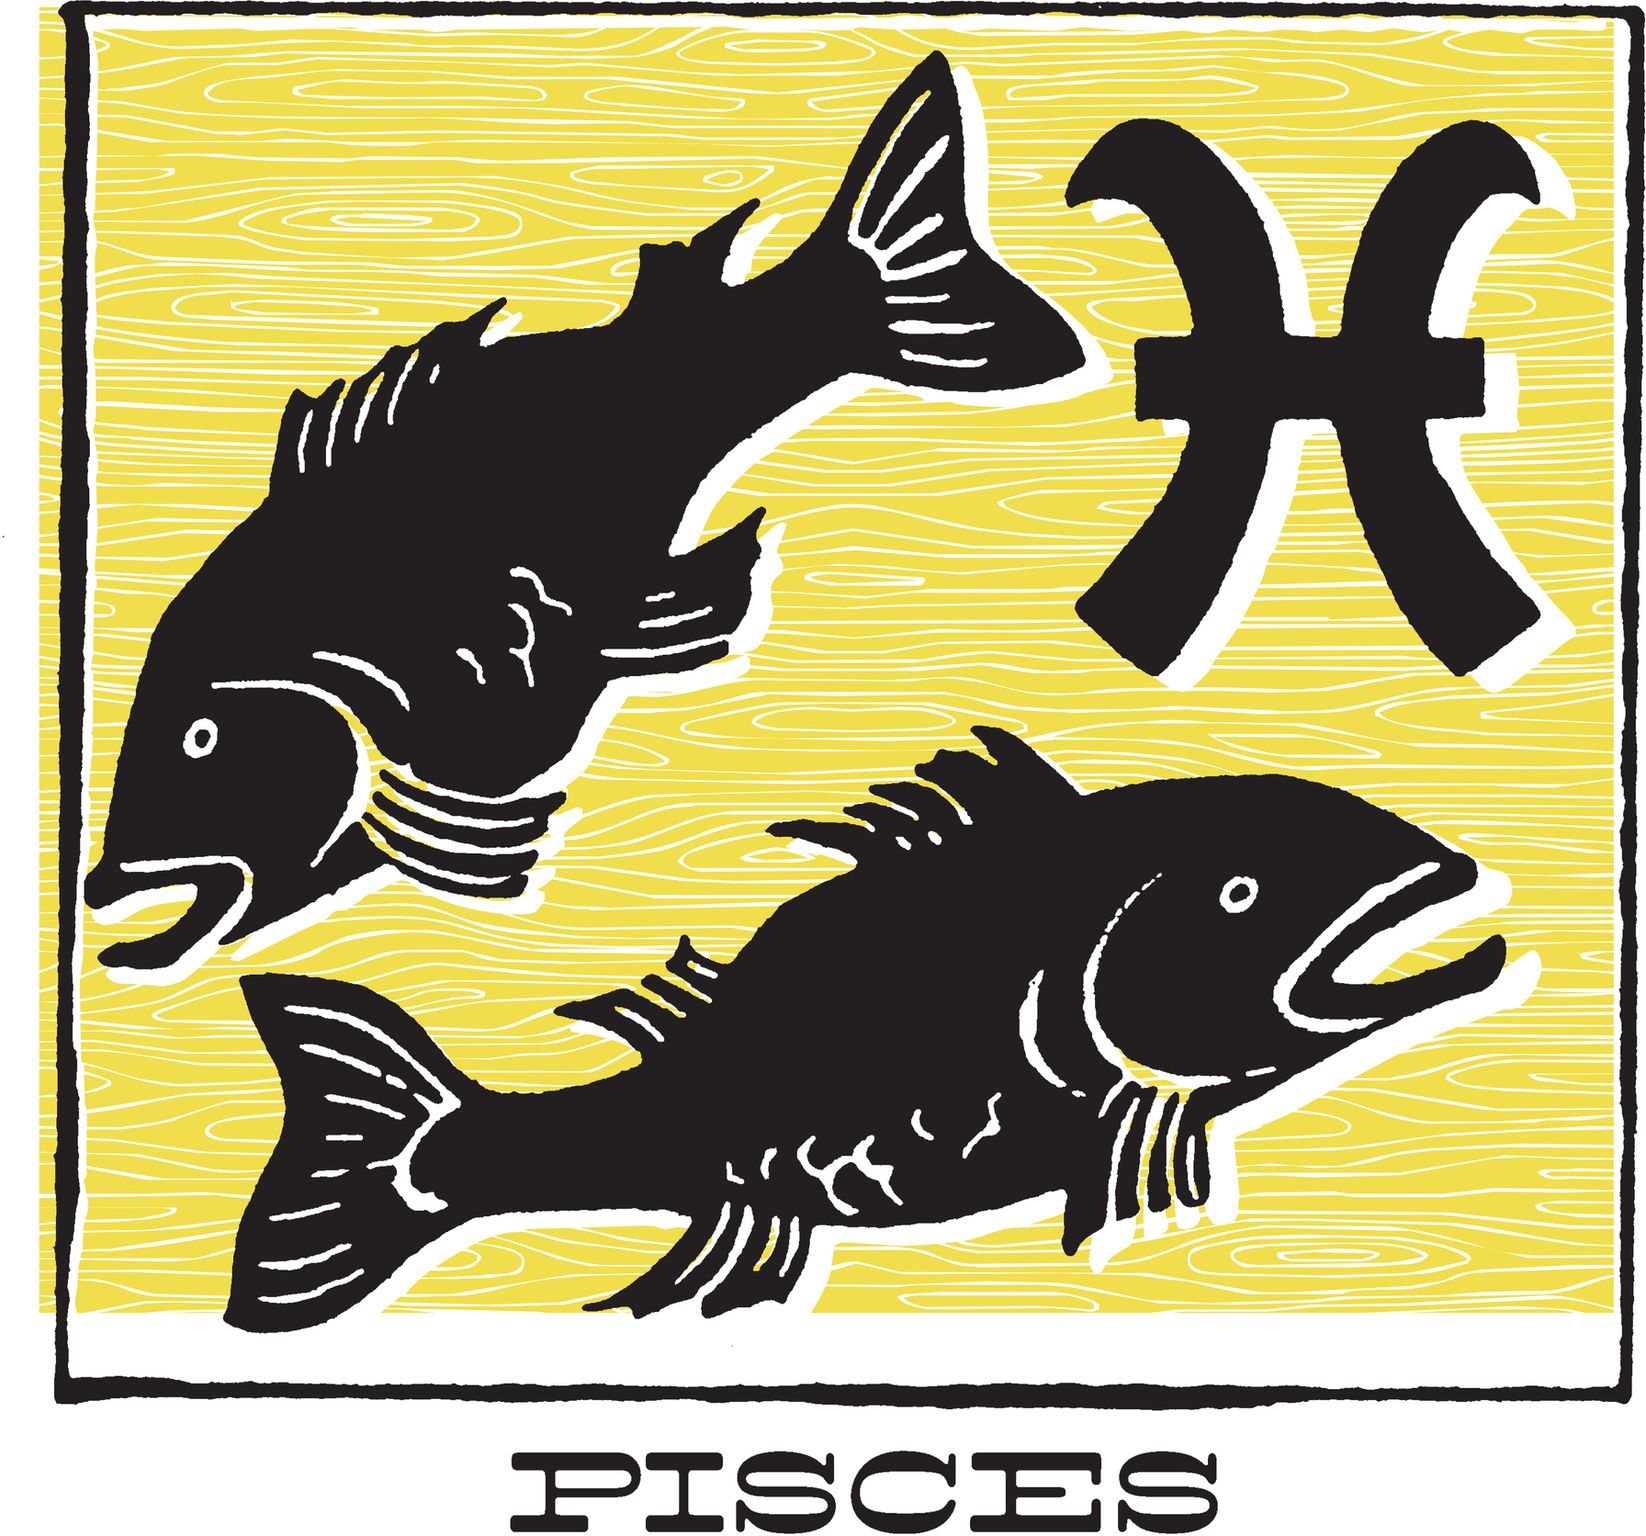 A symbol of the Pisces zodiac sign. | Source: Getty Images